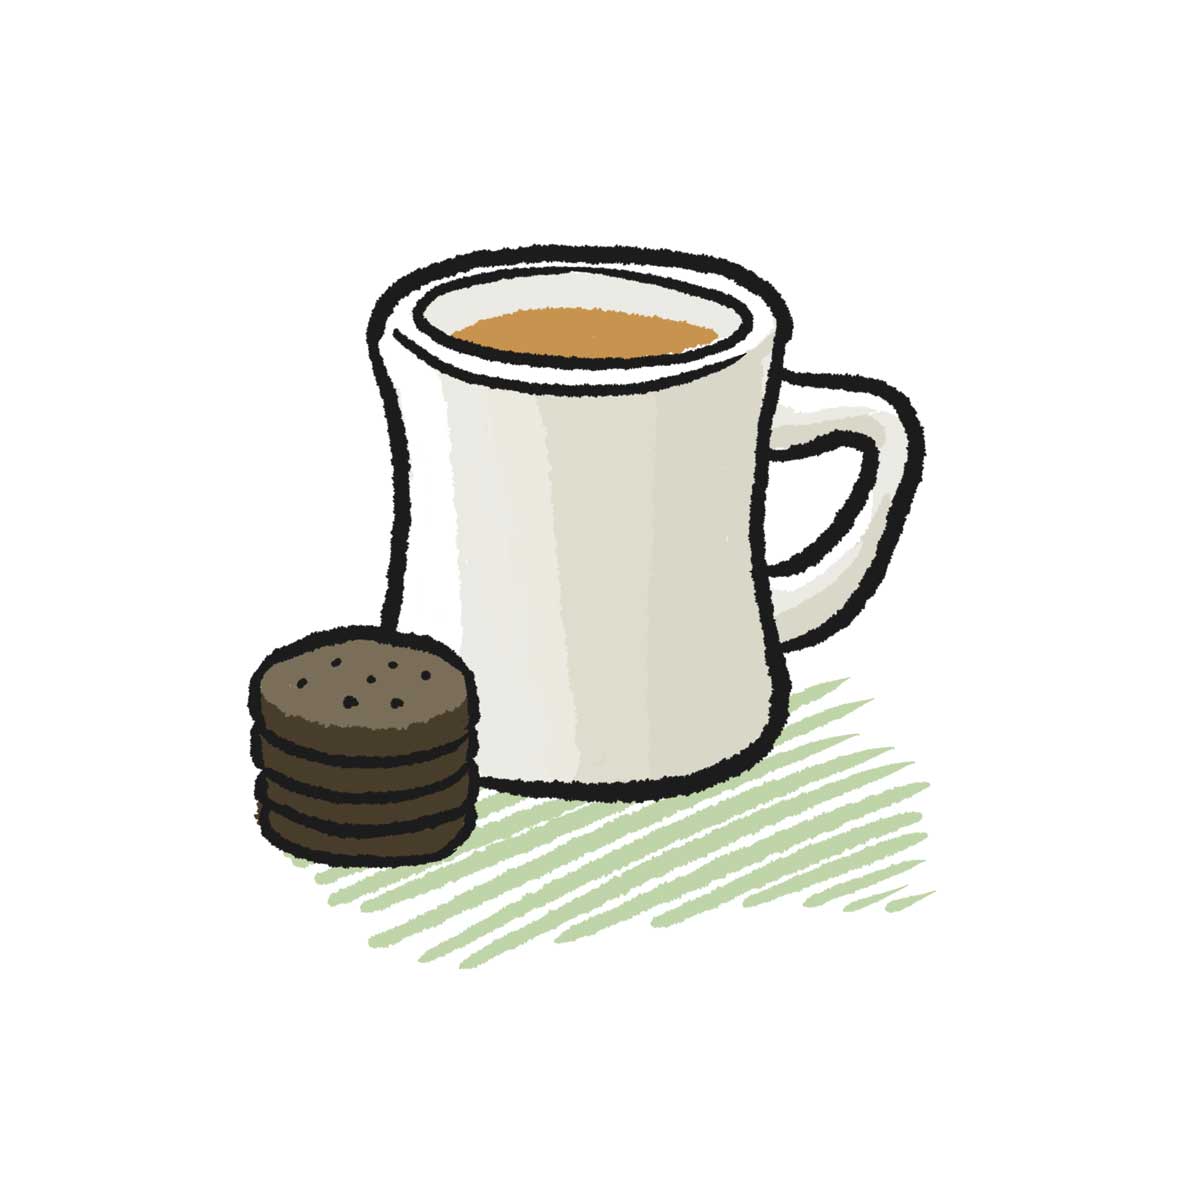 An illustration of a diner-style mug with a stack of Thin Mints cookies